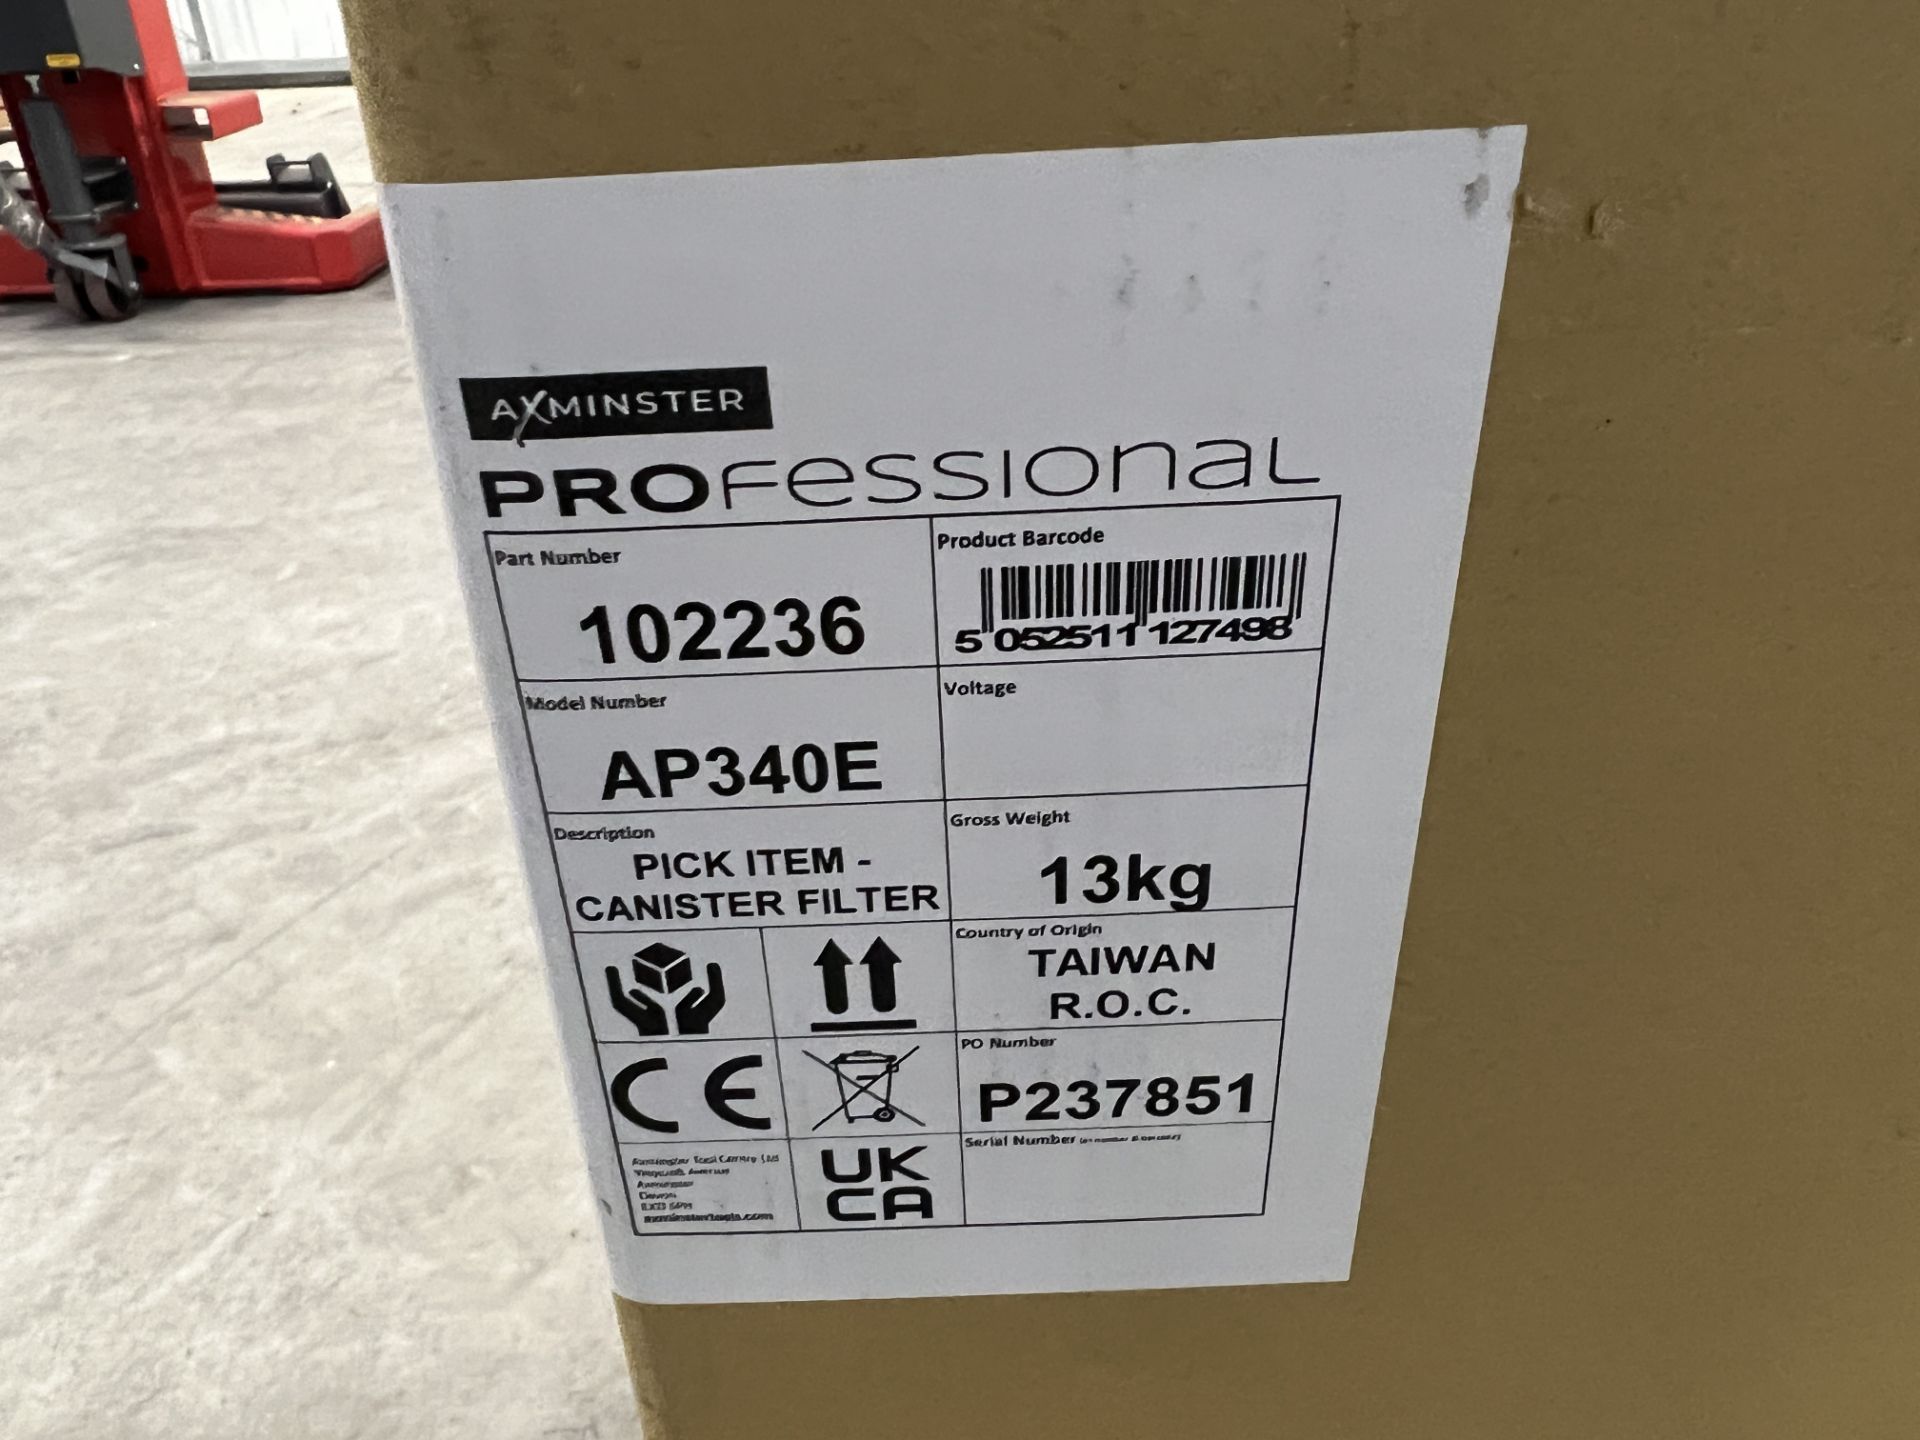 Axminster Professional AP340E extractor unit, S/No. M224991, 230 volts CE marked including 2 x - Image 4 of 7